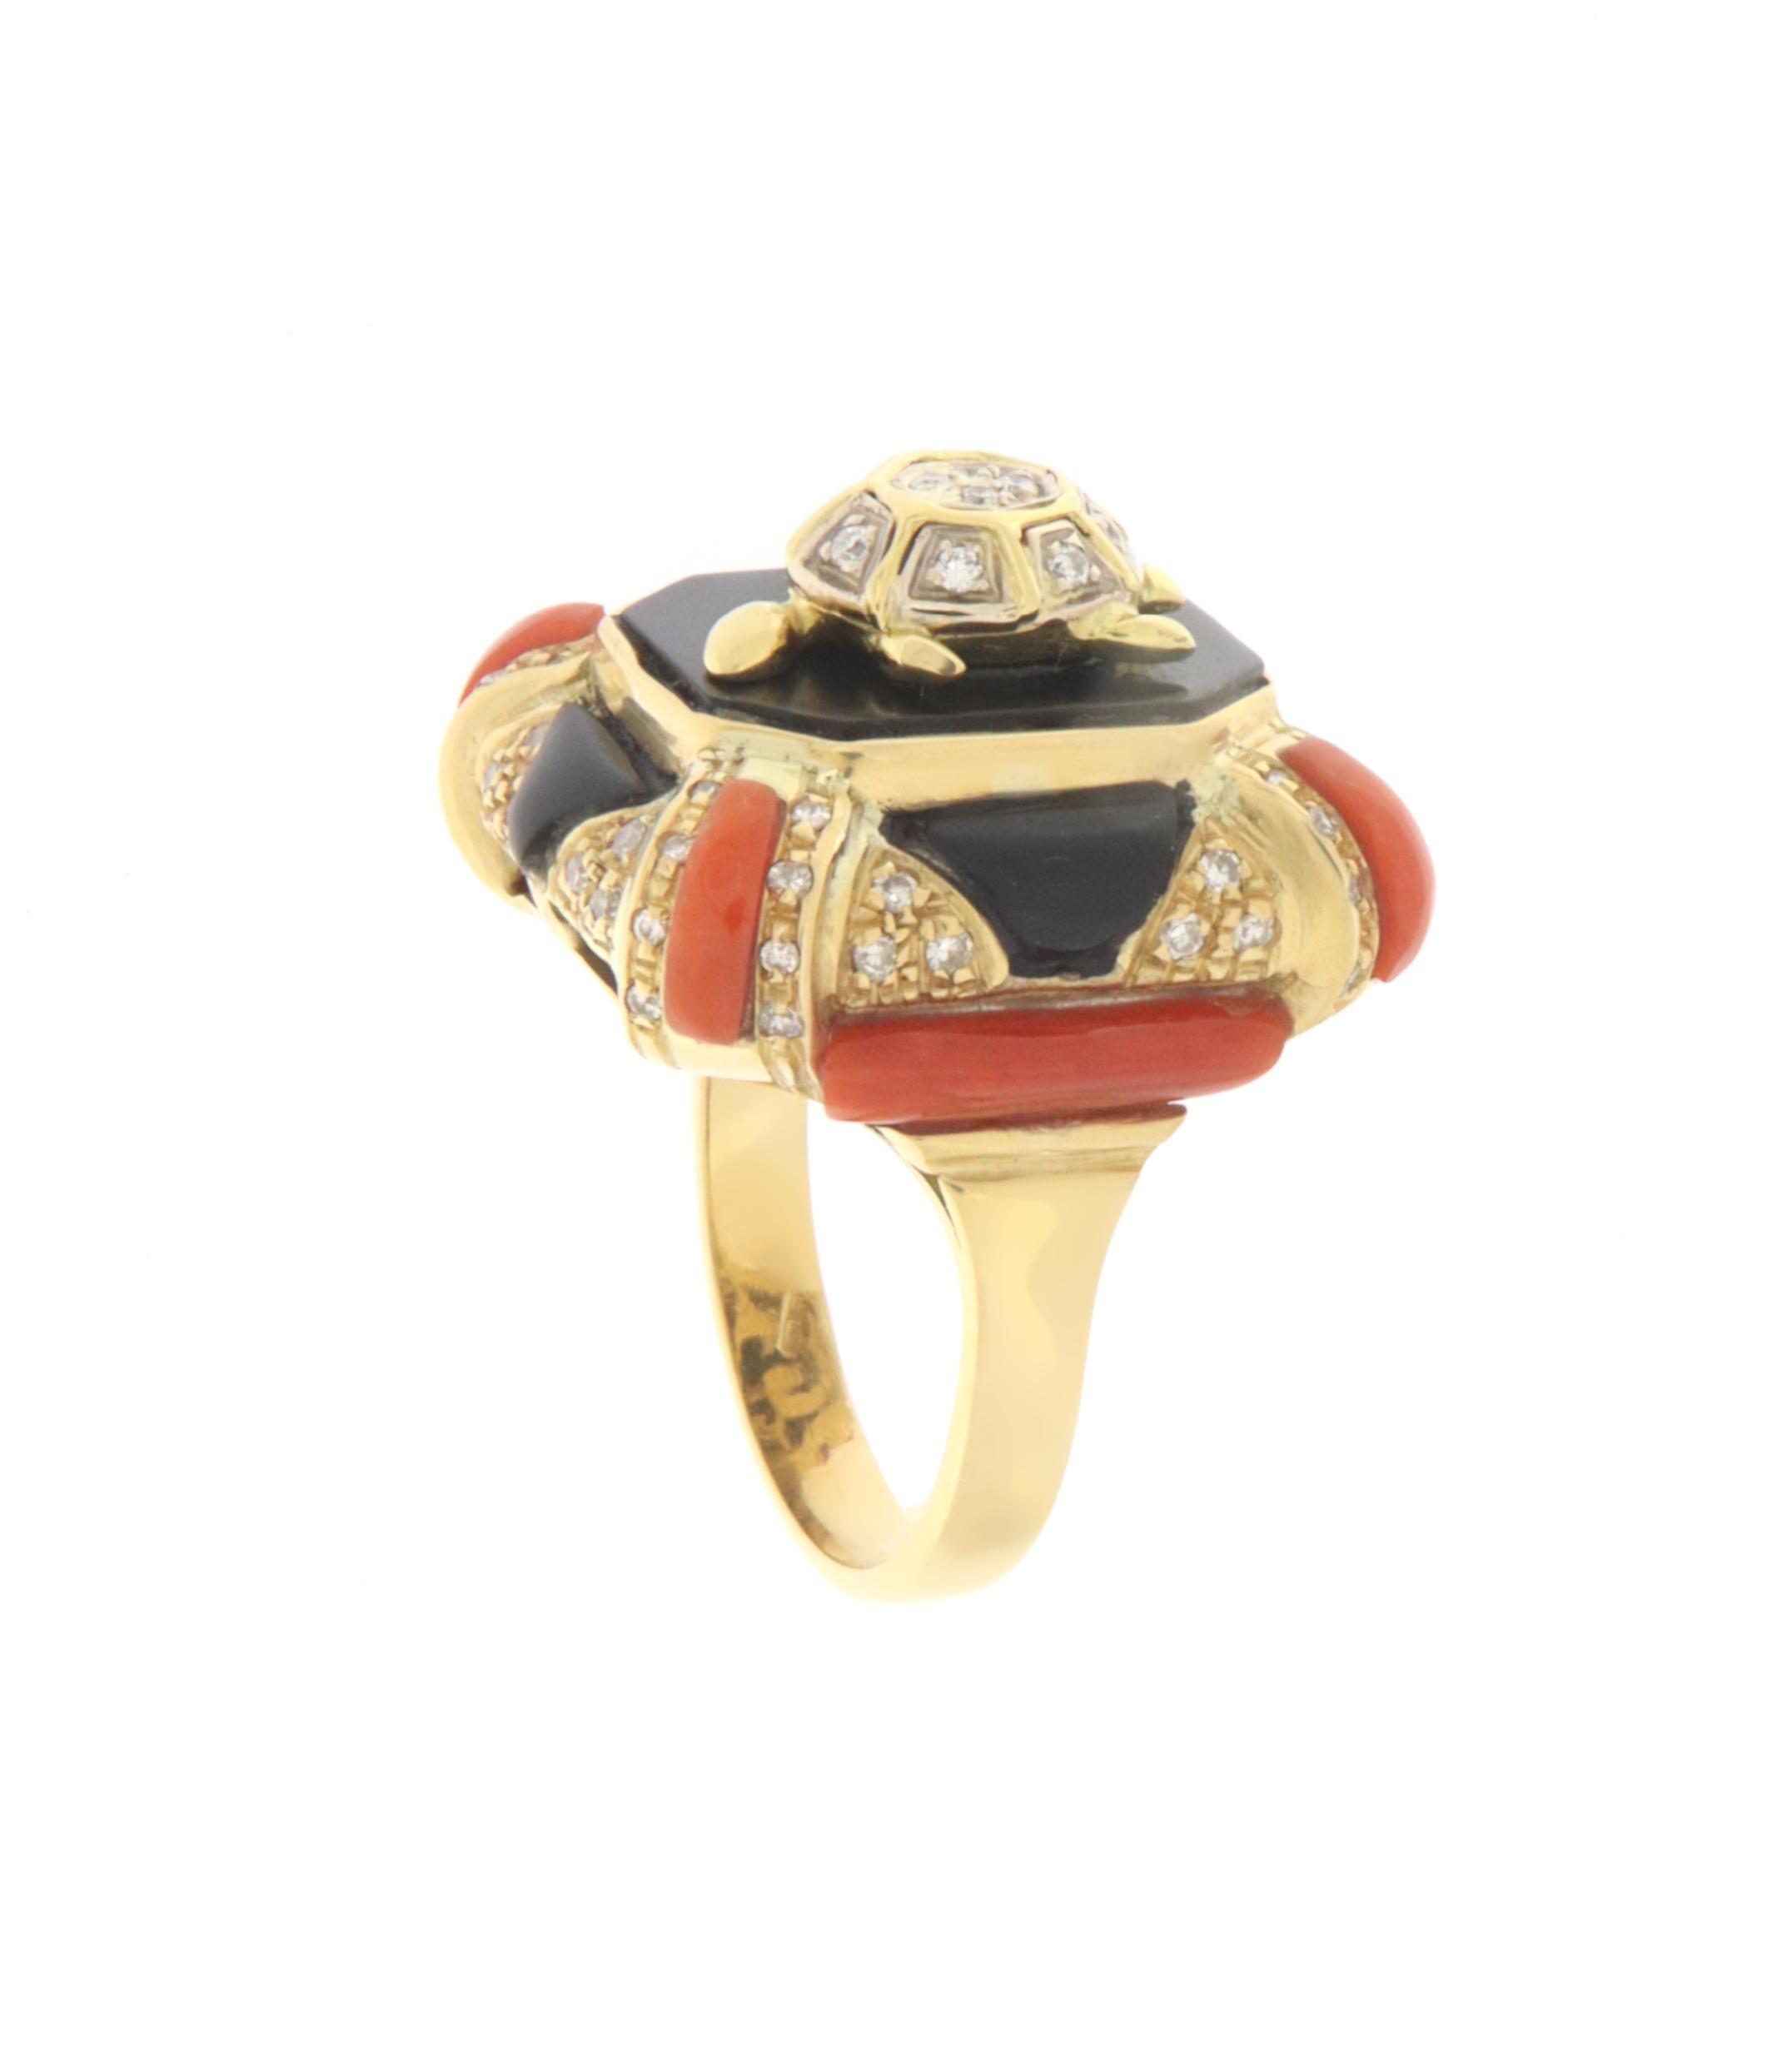 Brilliant Cut Coral Diamonds Onyx 18 Karat Yellow Gold Cocktail Ring For Sale